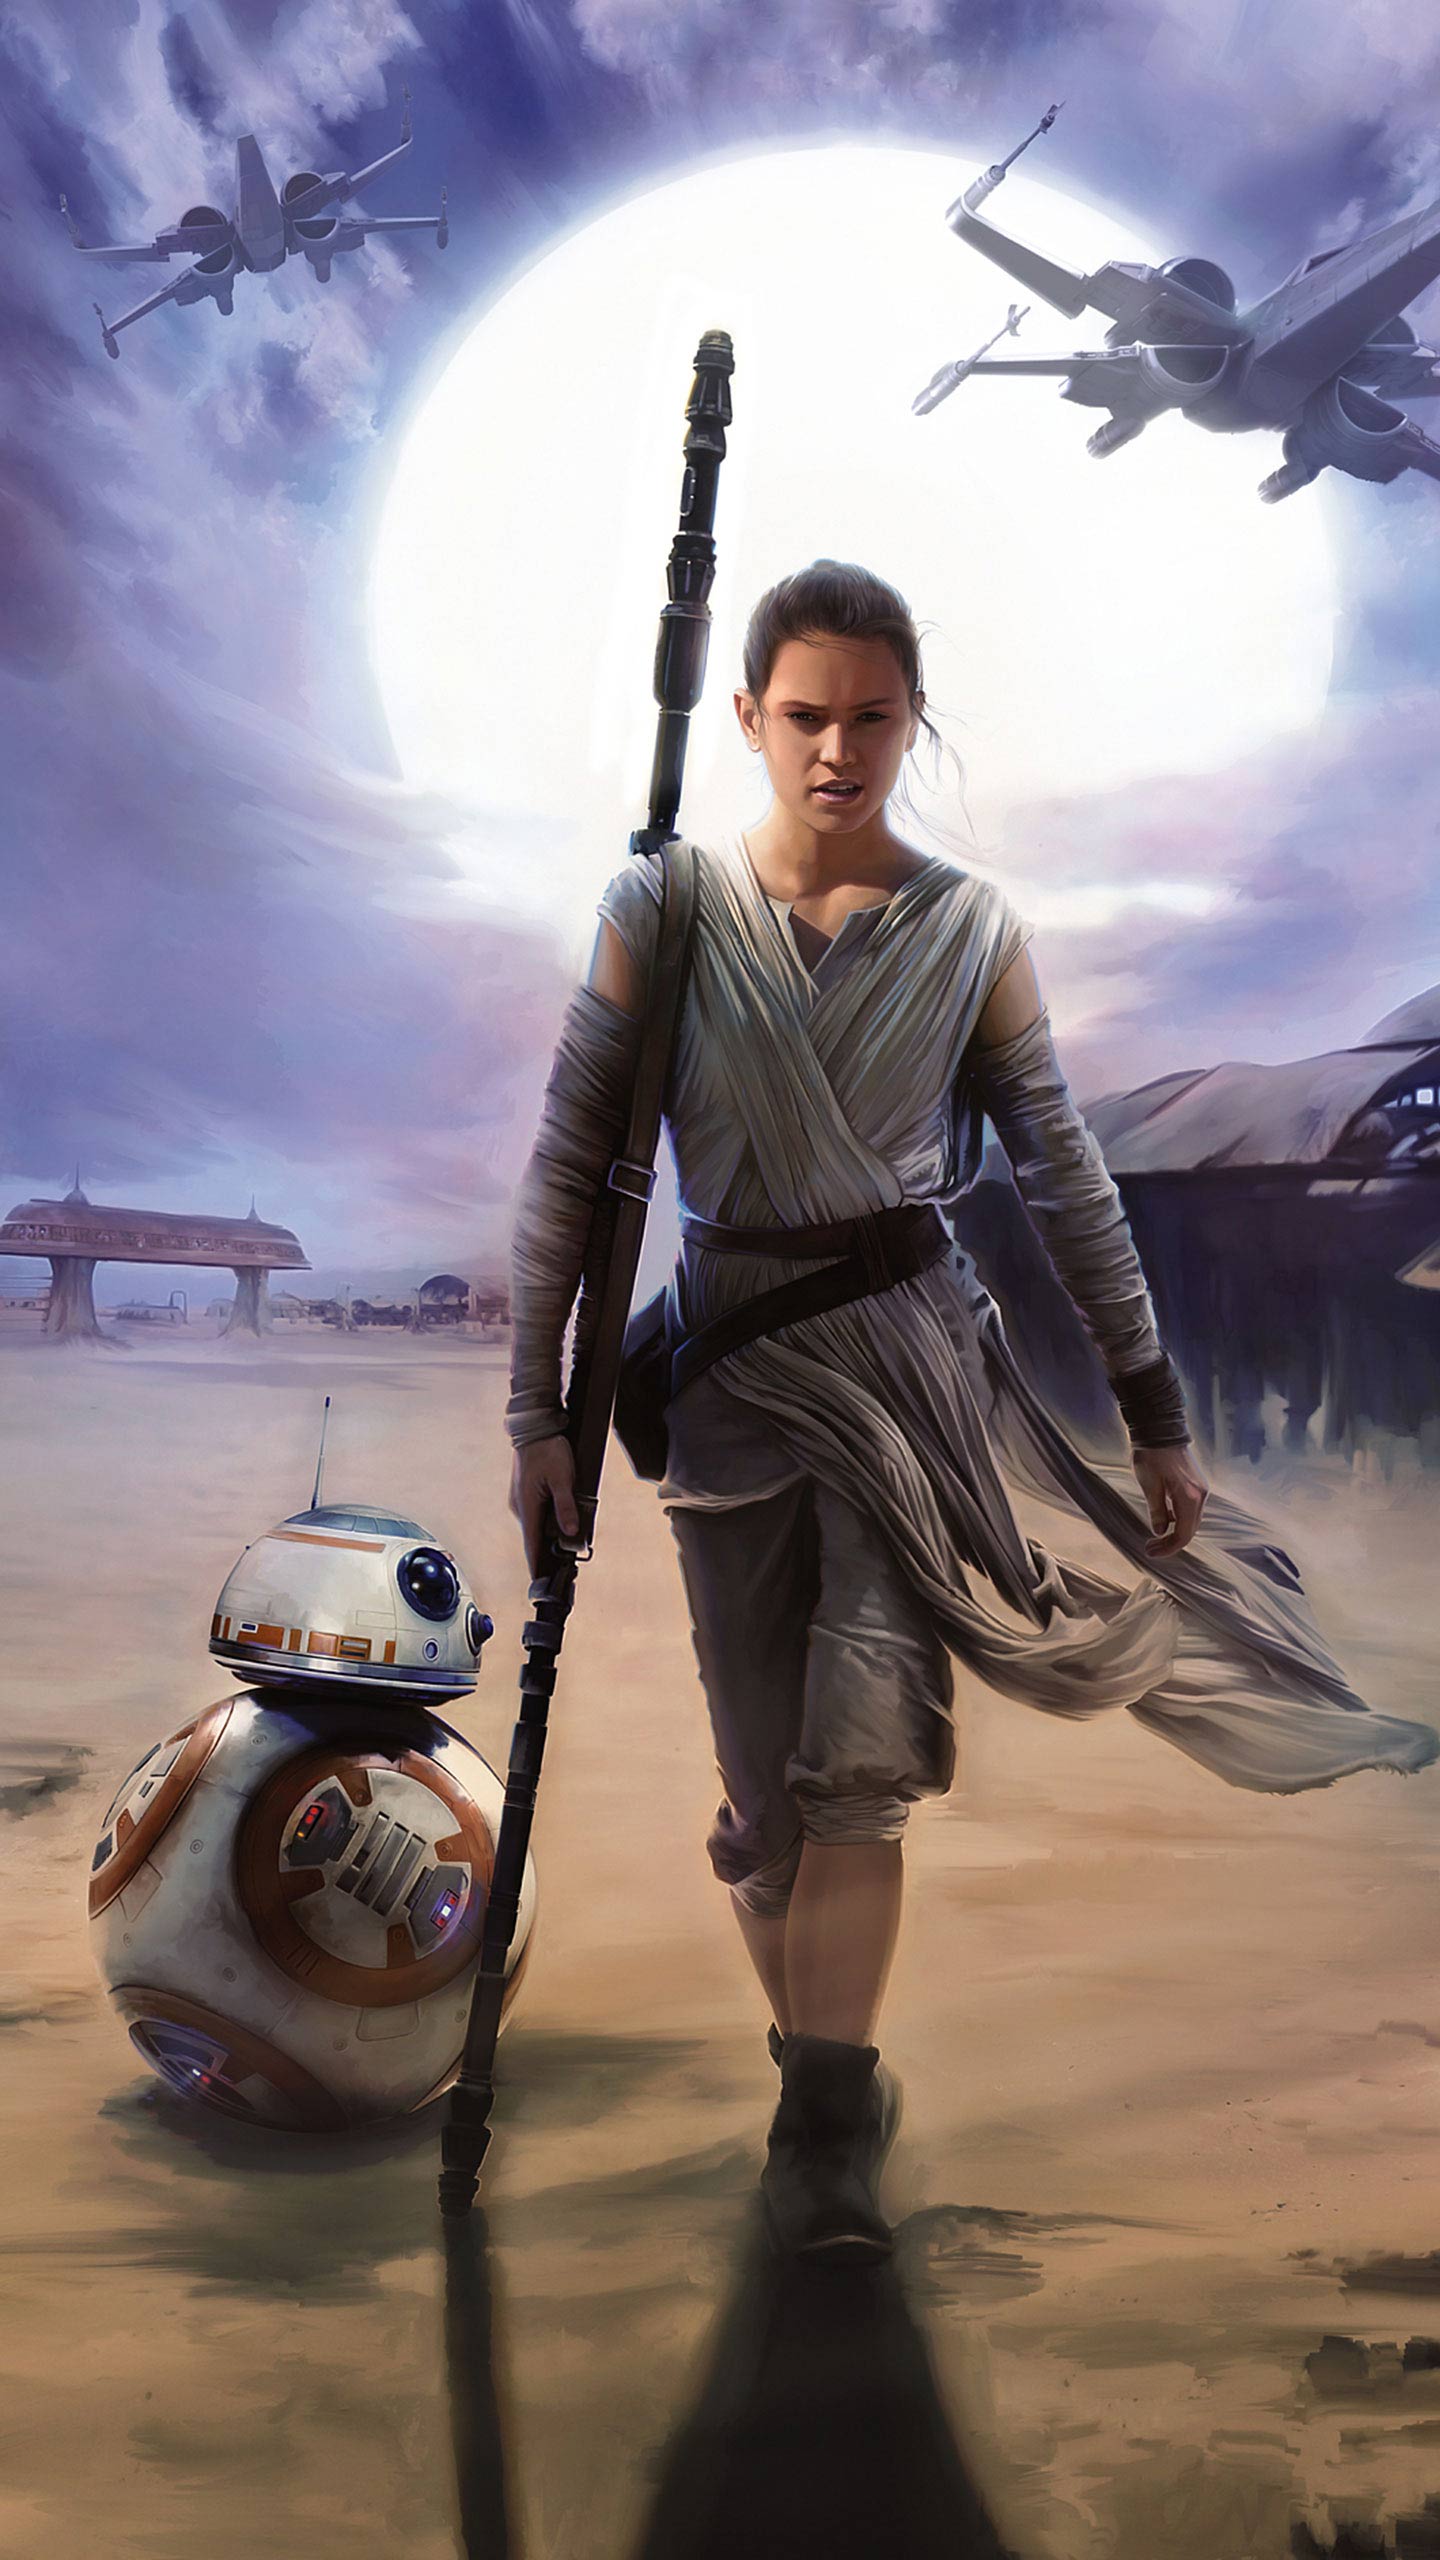 Star Wars The Force Awakens Wallpaper For Your iPhone 6s